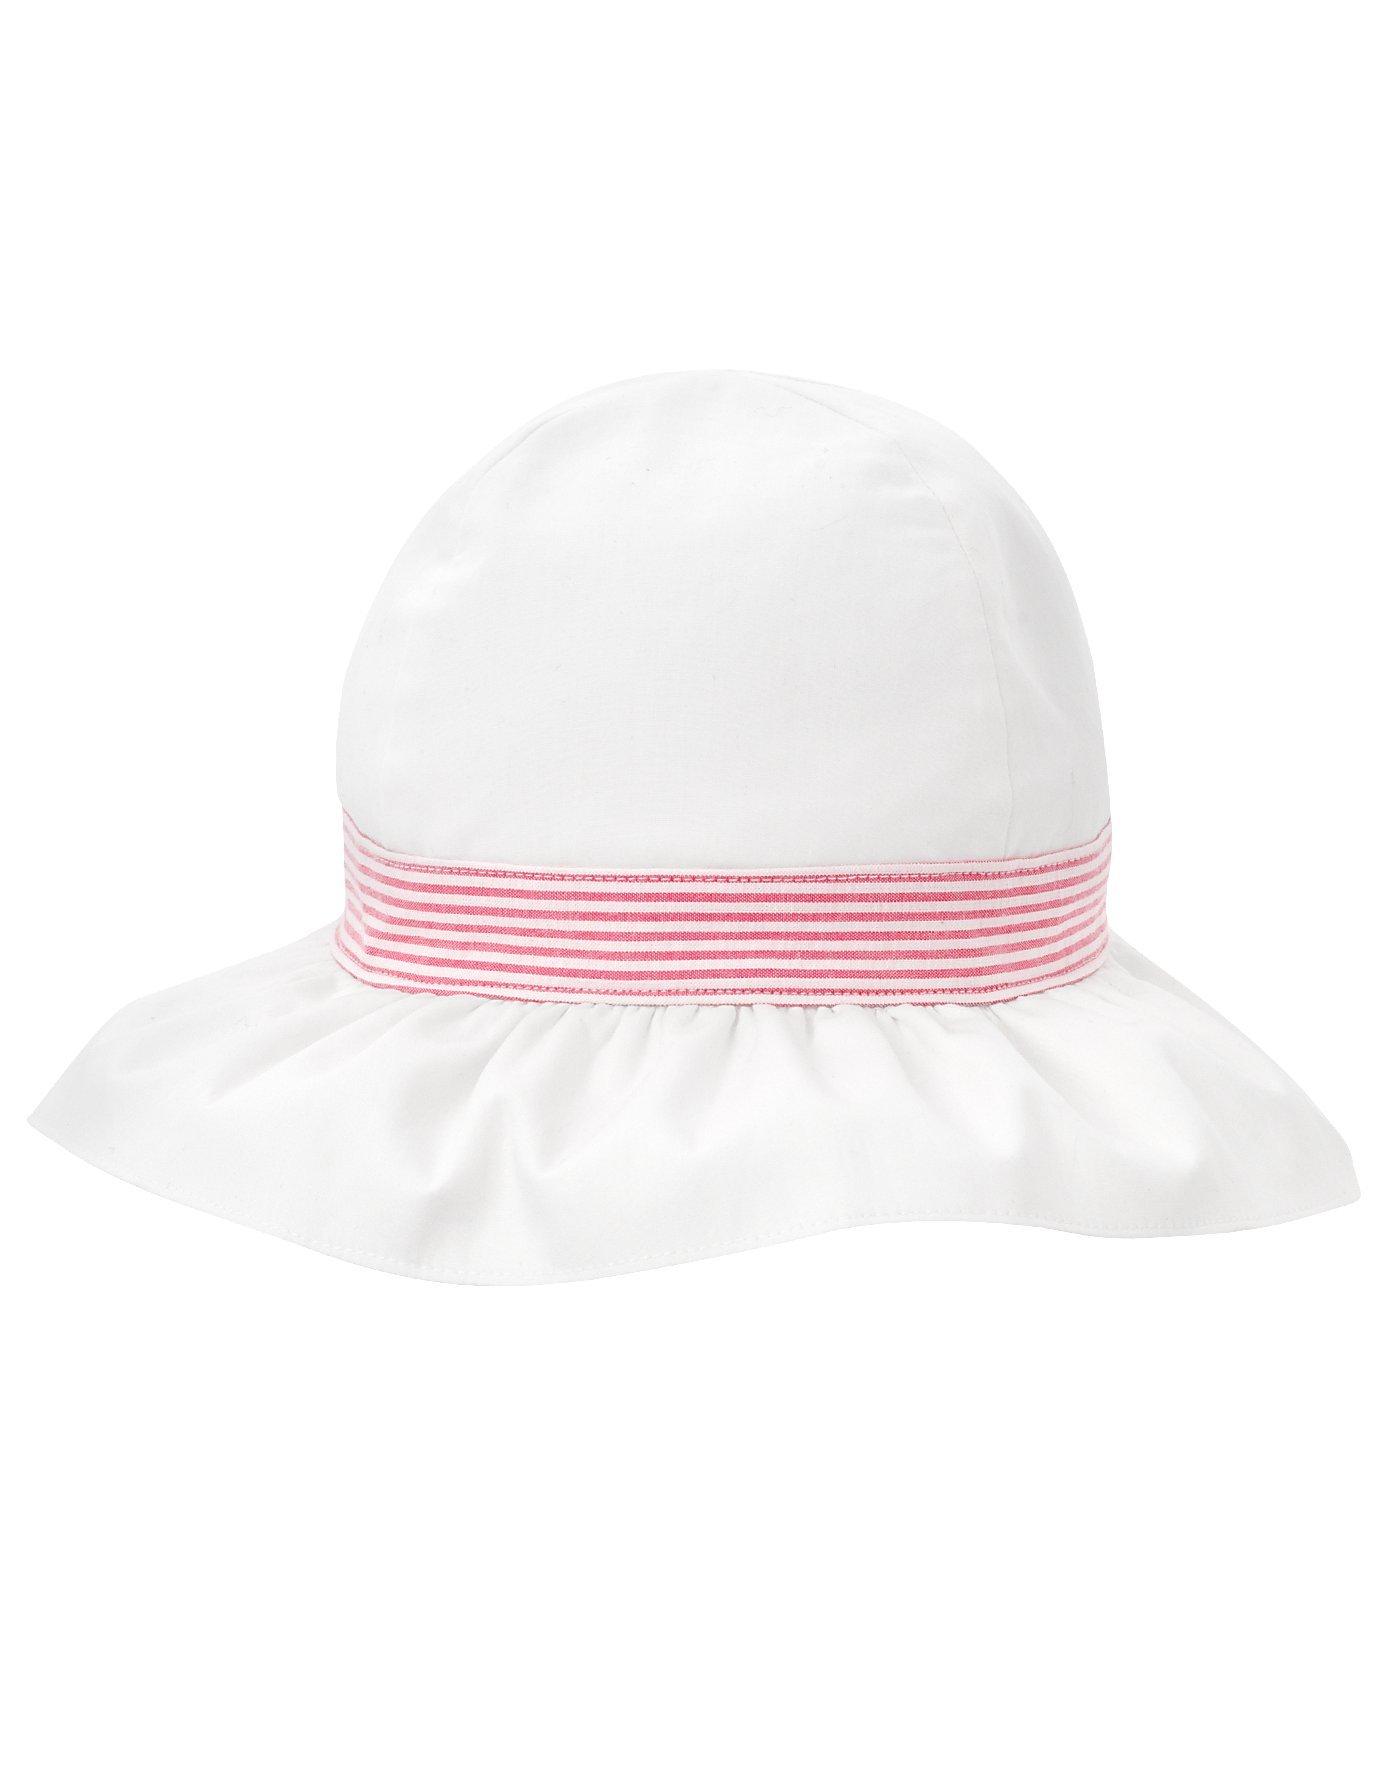 Stripe Bow Sunhat image number 0